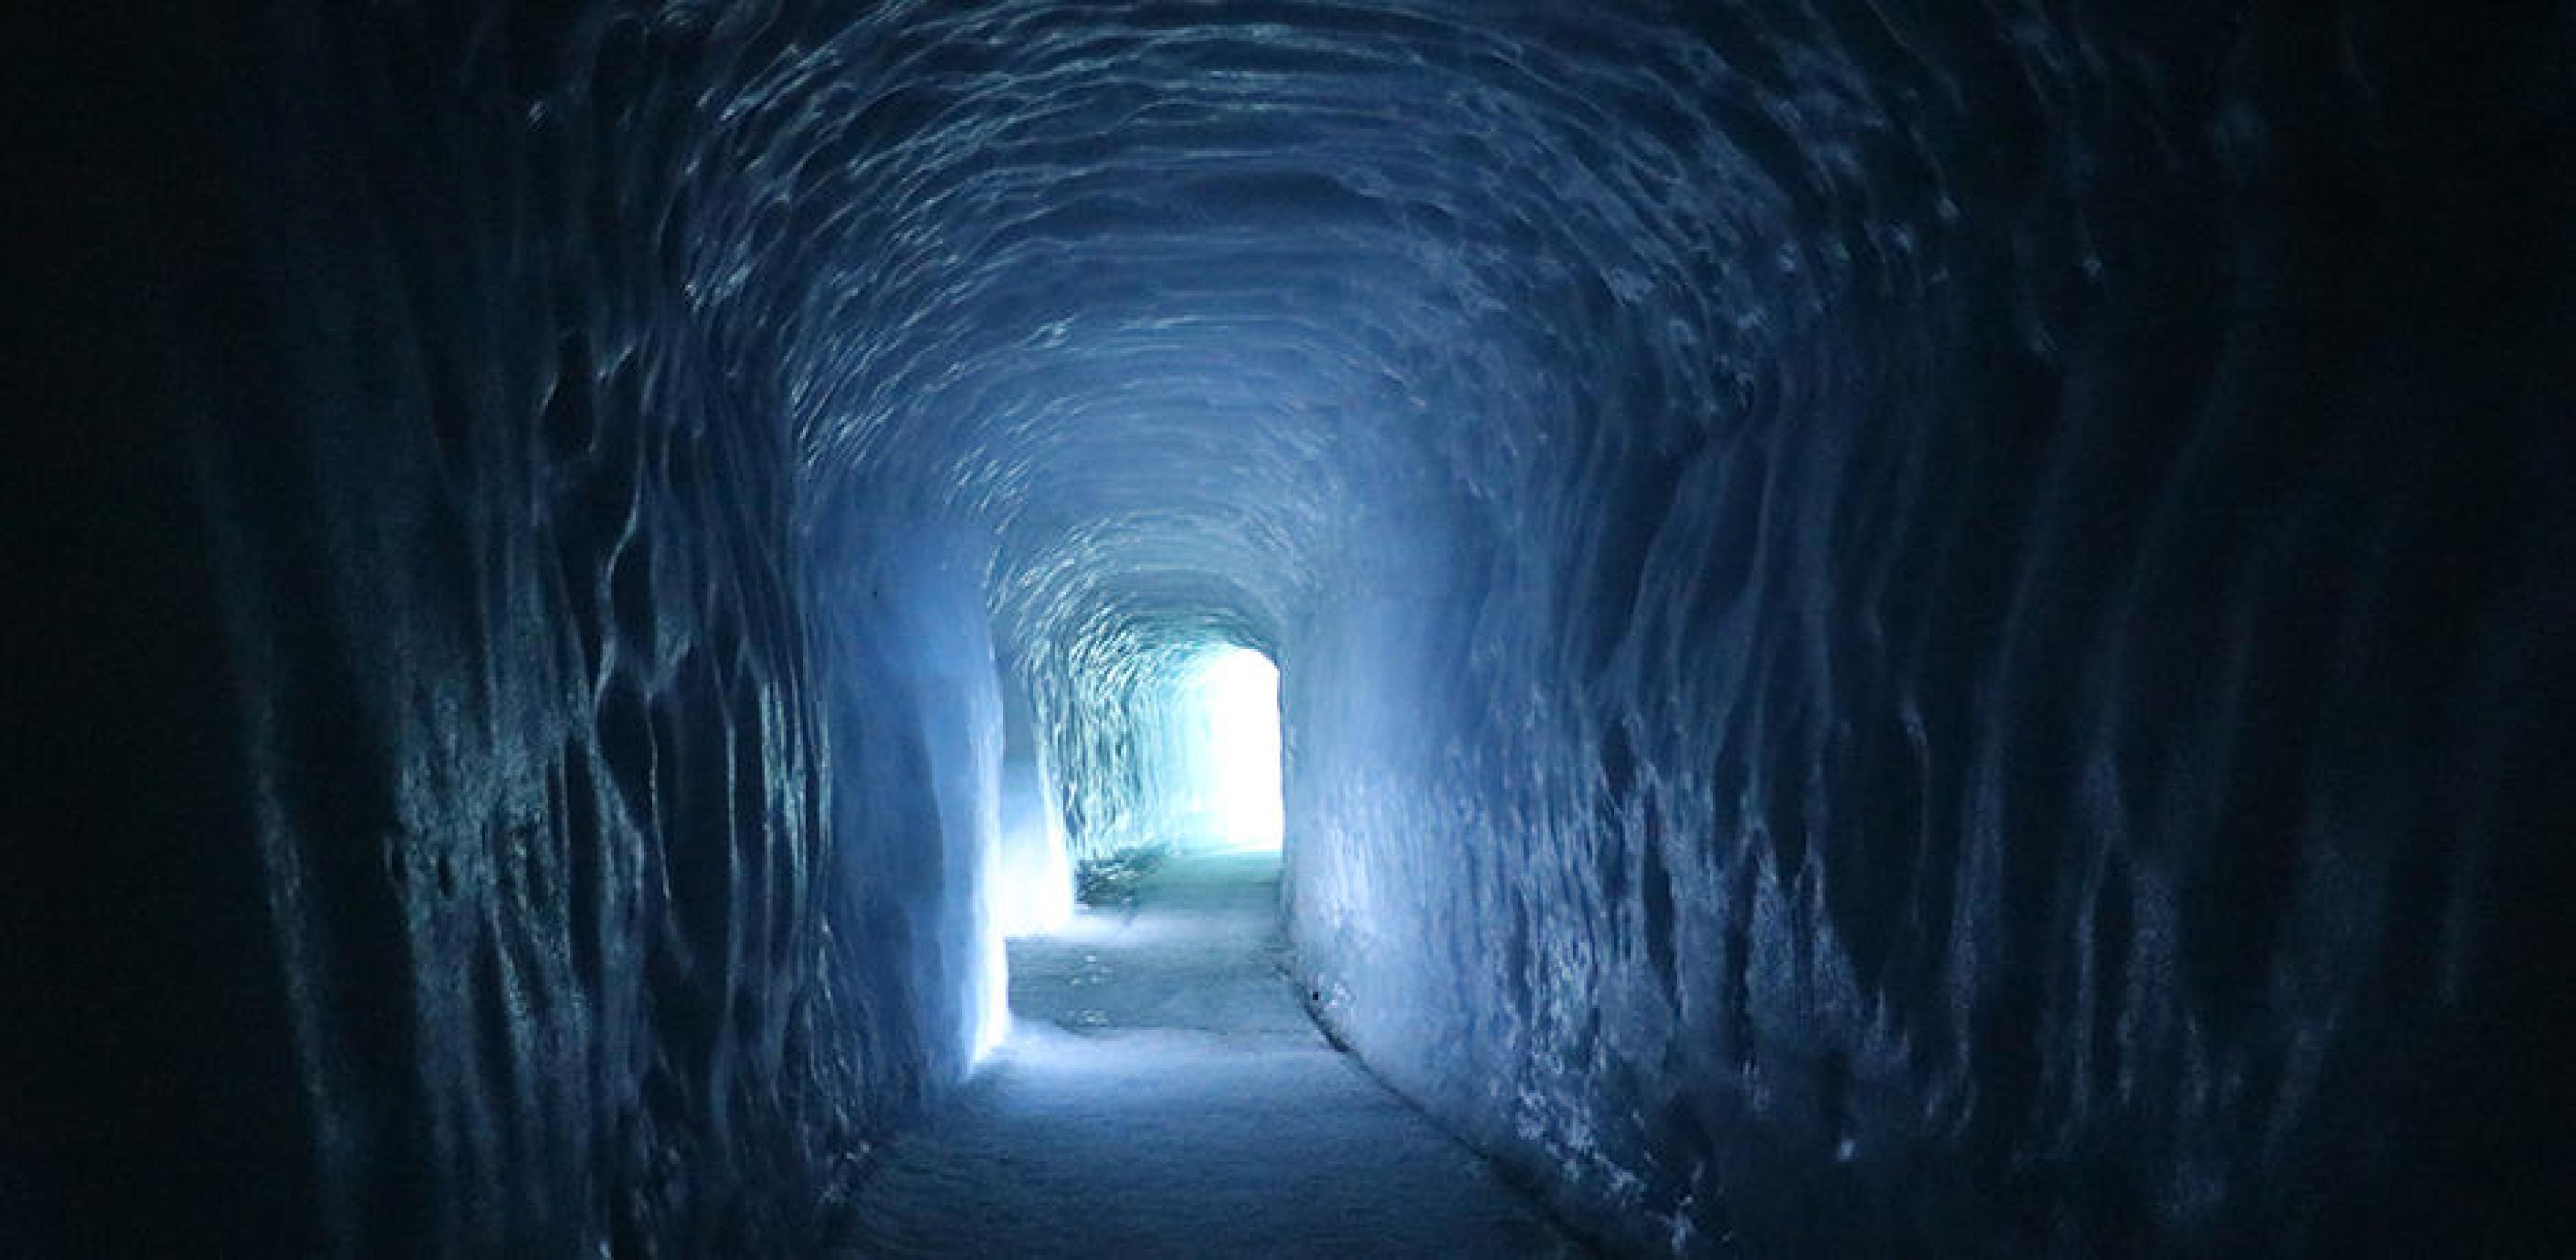 One hundred feet below the surface of the Langjökull glacier  in the tunnels of tourist attraction “Into the Glacier”, Iceland